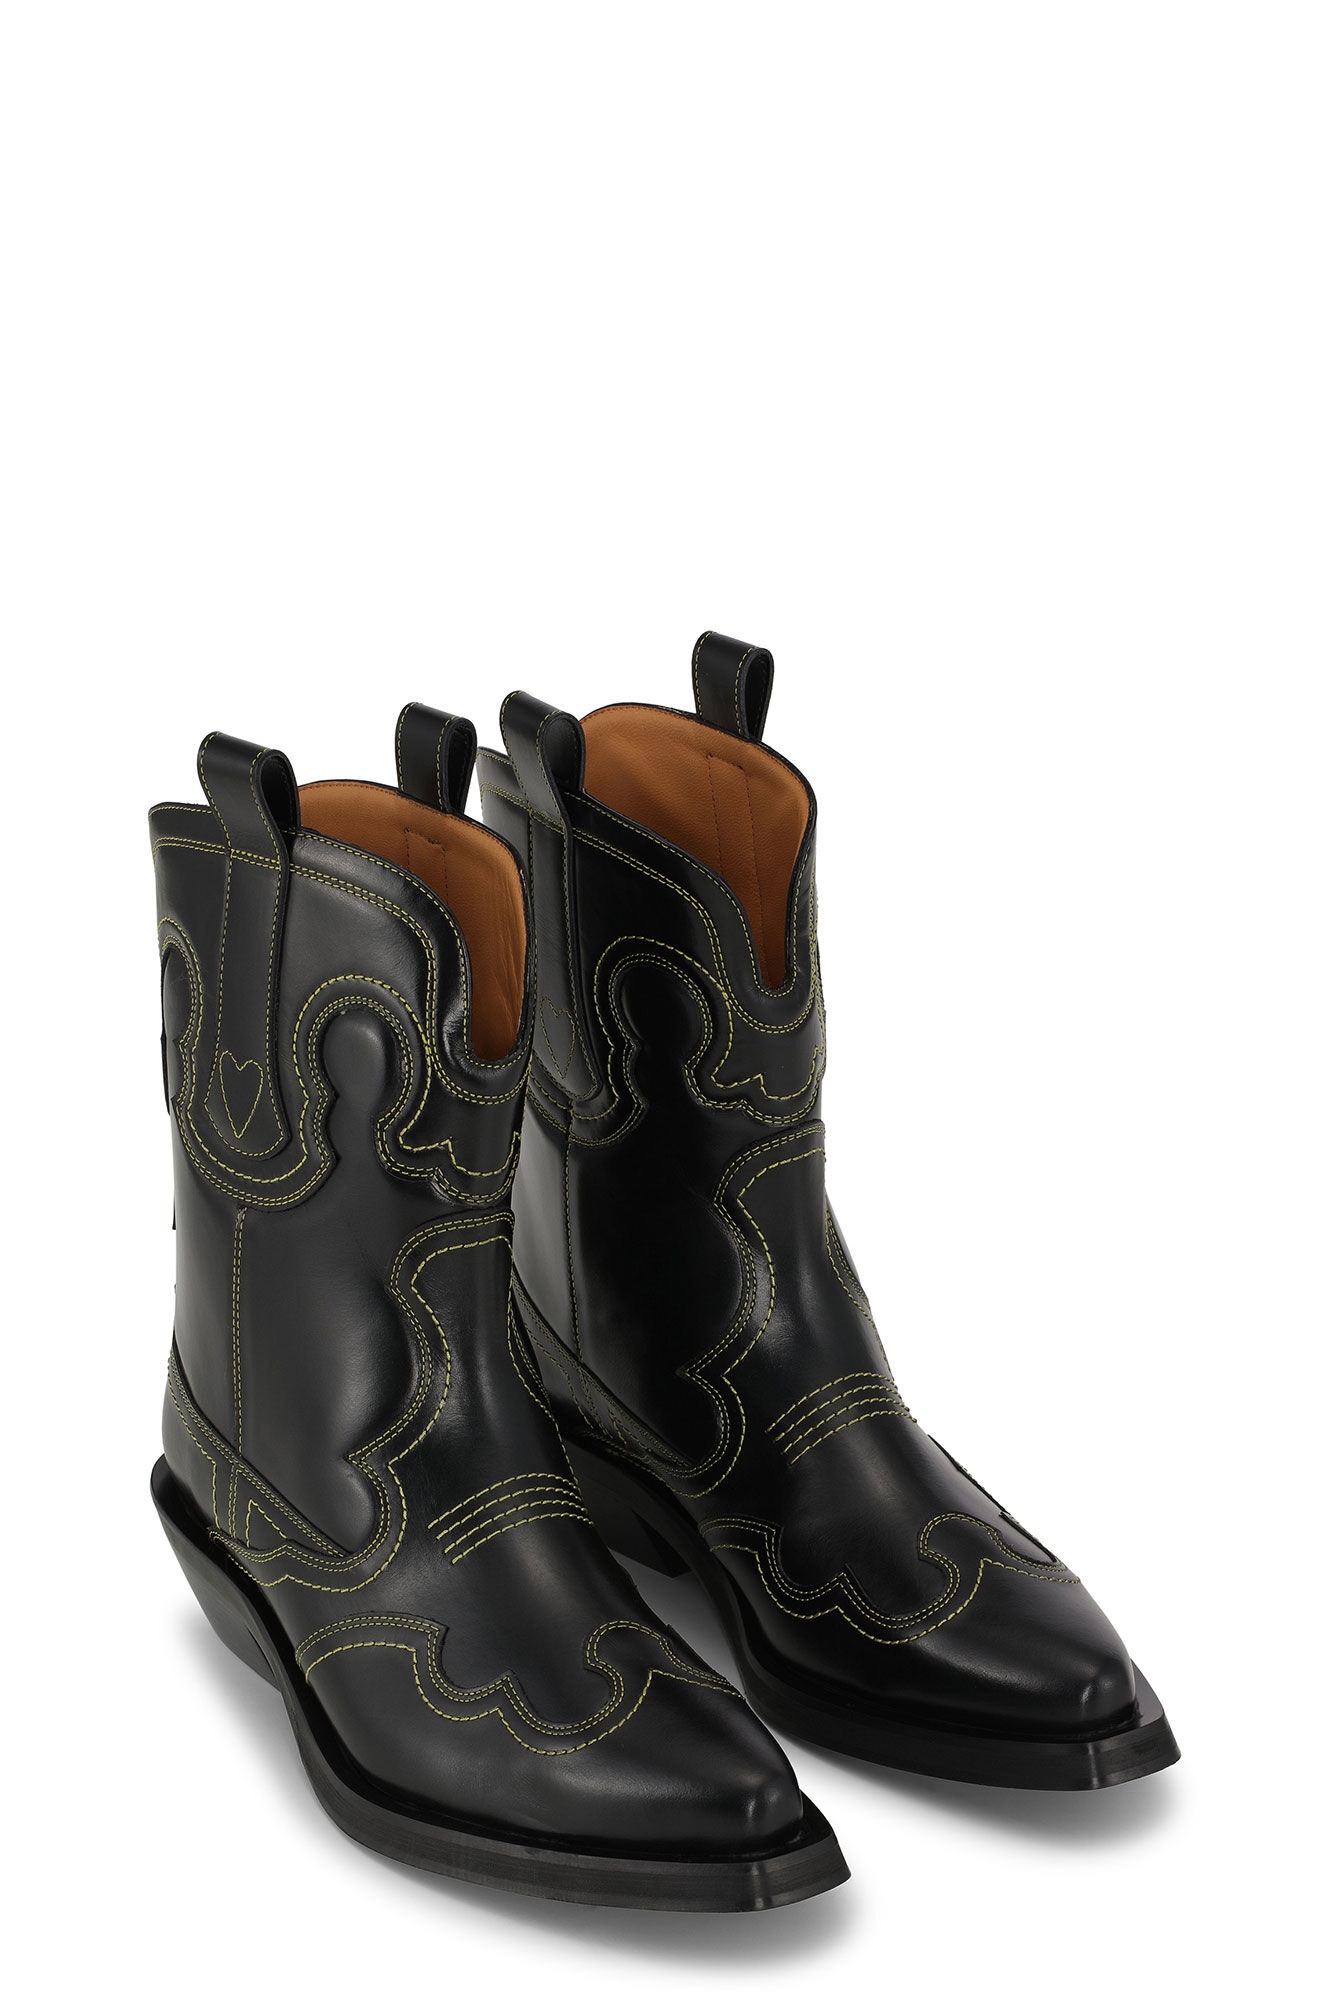 BLACK/YELLOW LOW SHAFT EMBROIDERED WESTERN BOOTS - 3